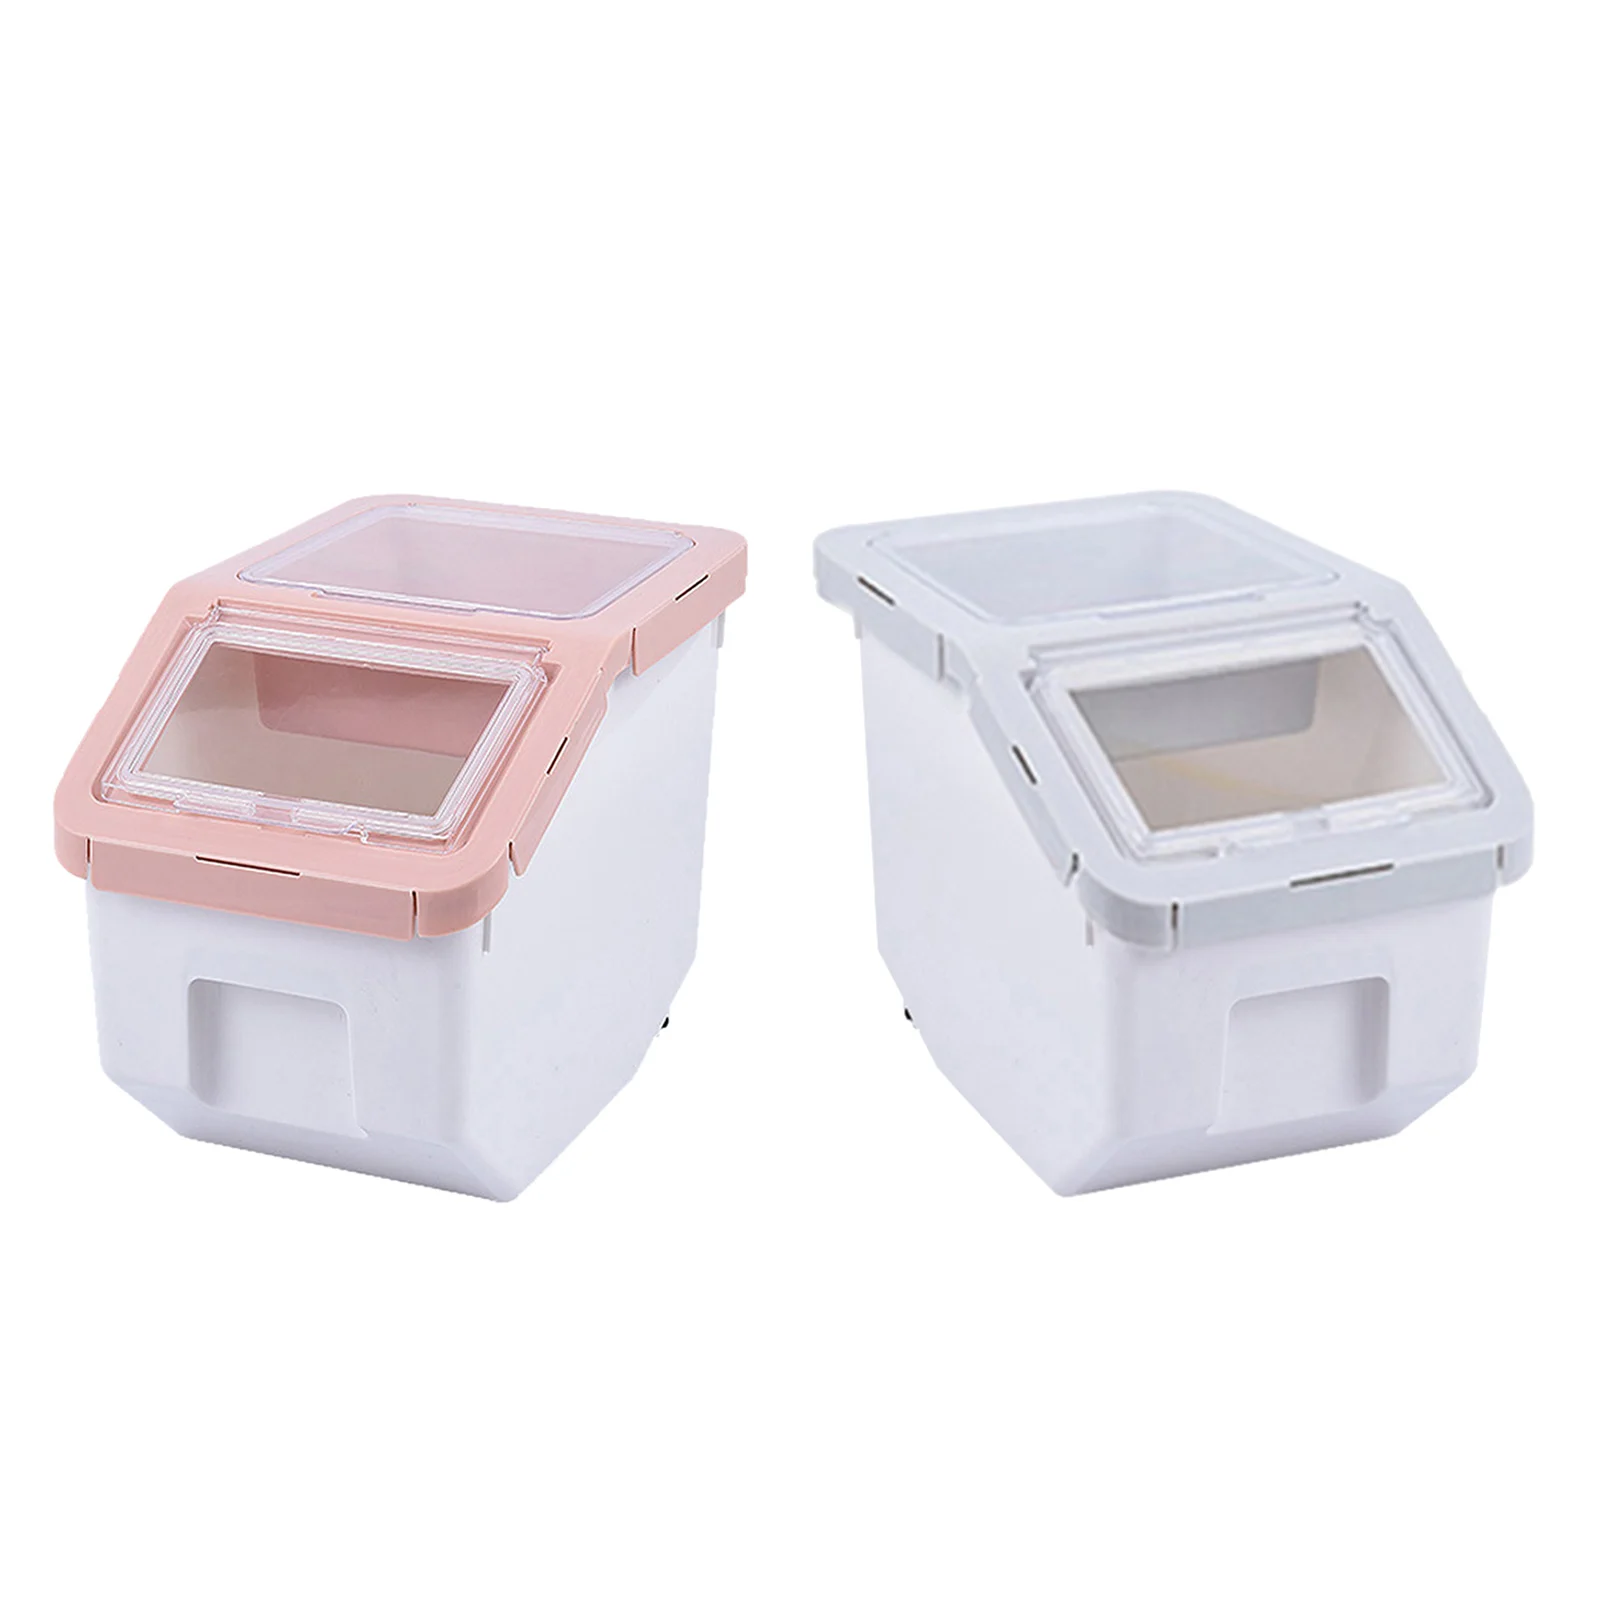 Pet Food Storage Container, Dog Feeder, Sealed Cereal Rice Storage Bin for Flour Grains Insect-proof